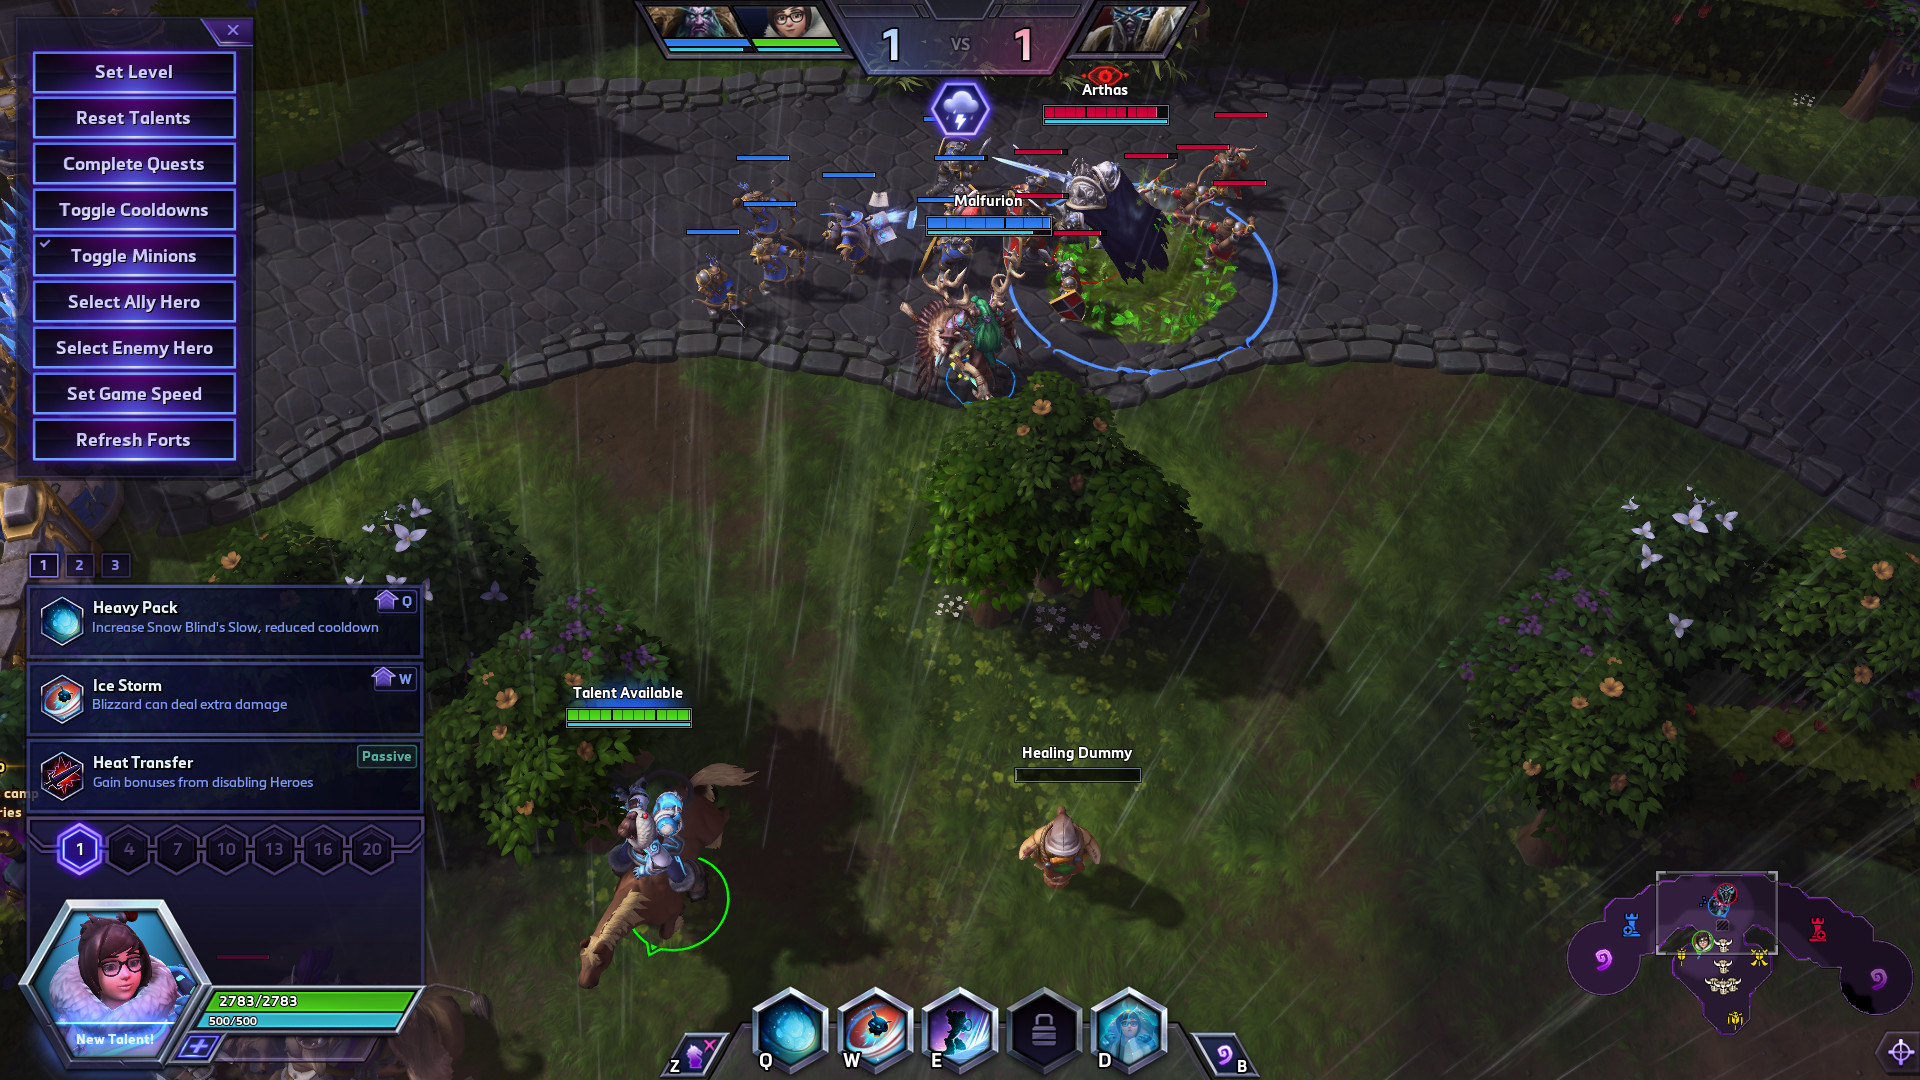 Heroes of the Storm Análise e Download (2023) - MMOs Brasil